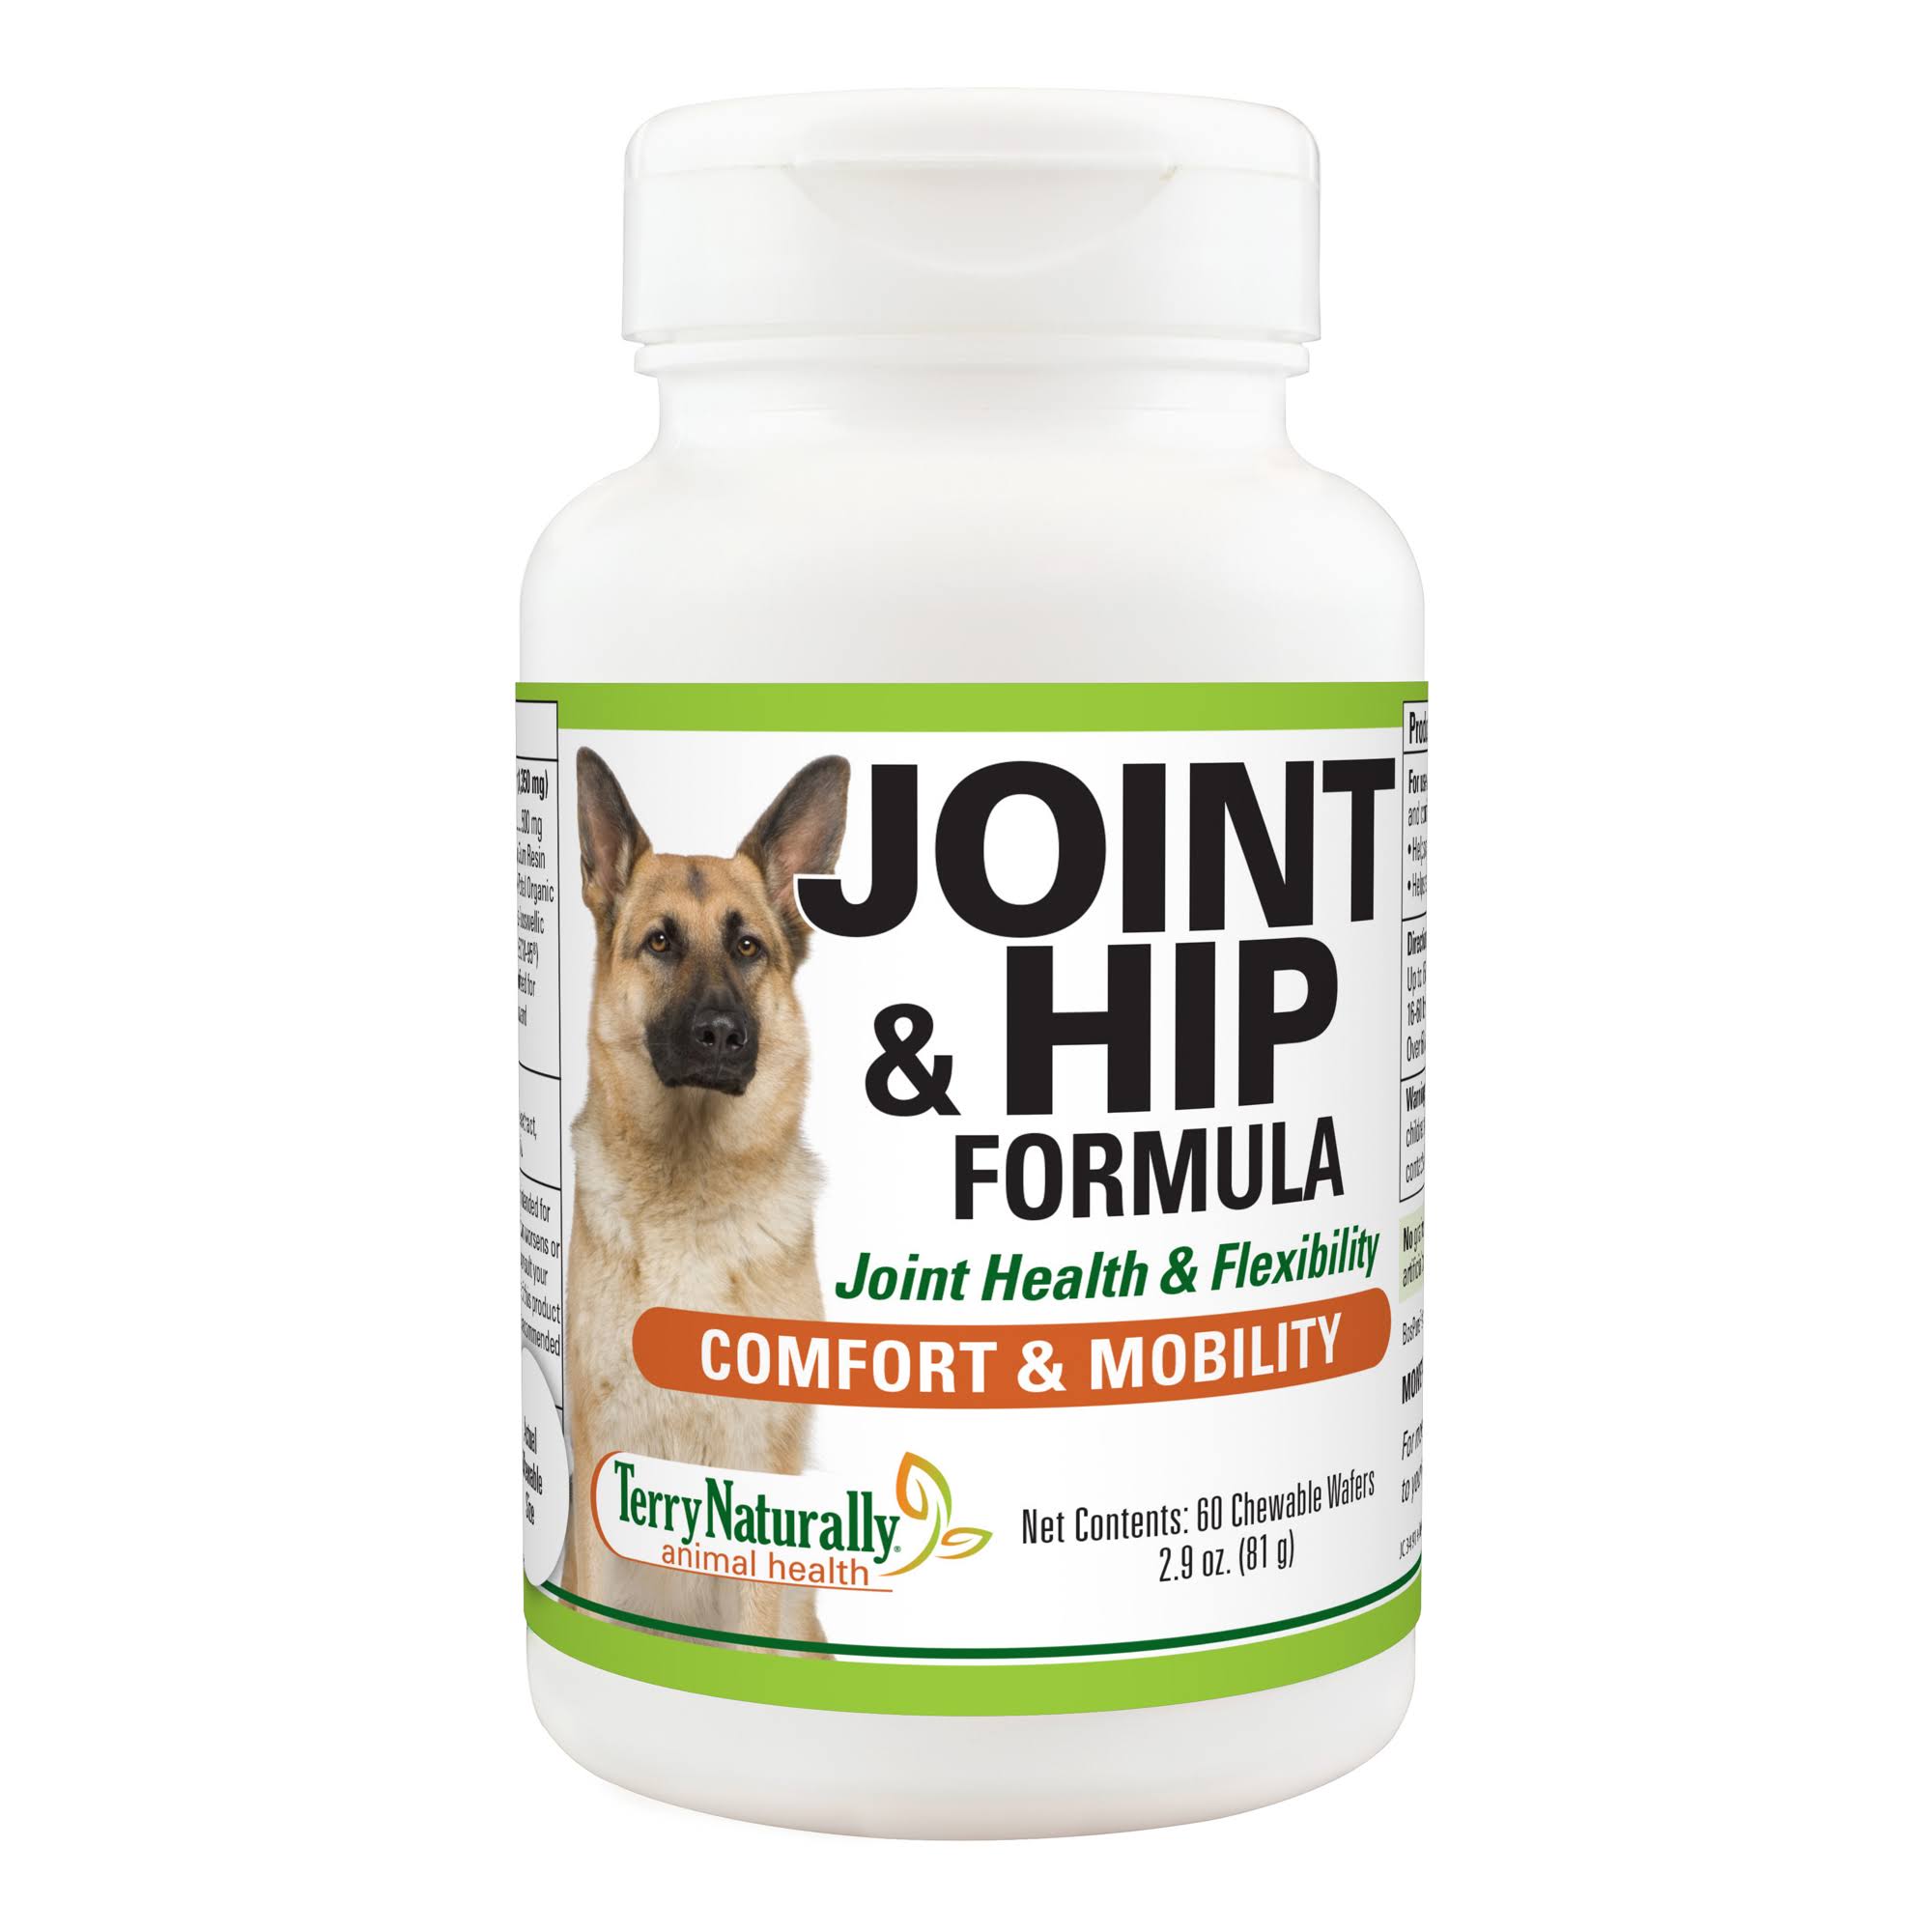 Terry Naturally Animal Health Joint & Hip Formula - 60 Chewable Wafers